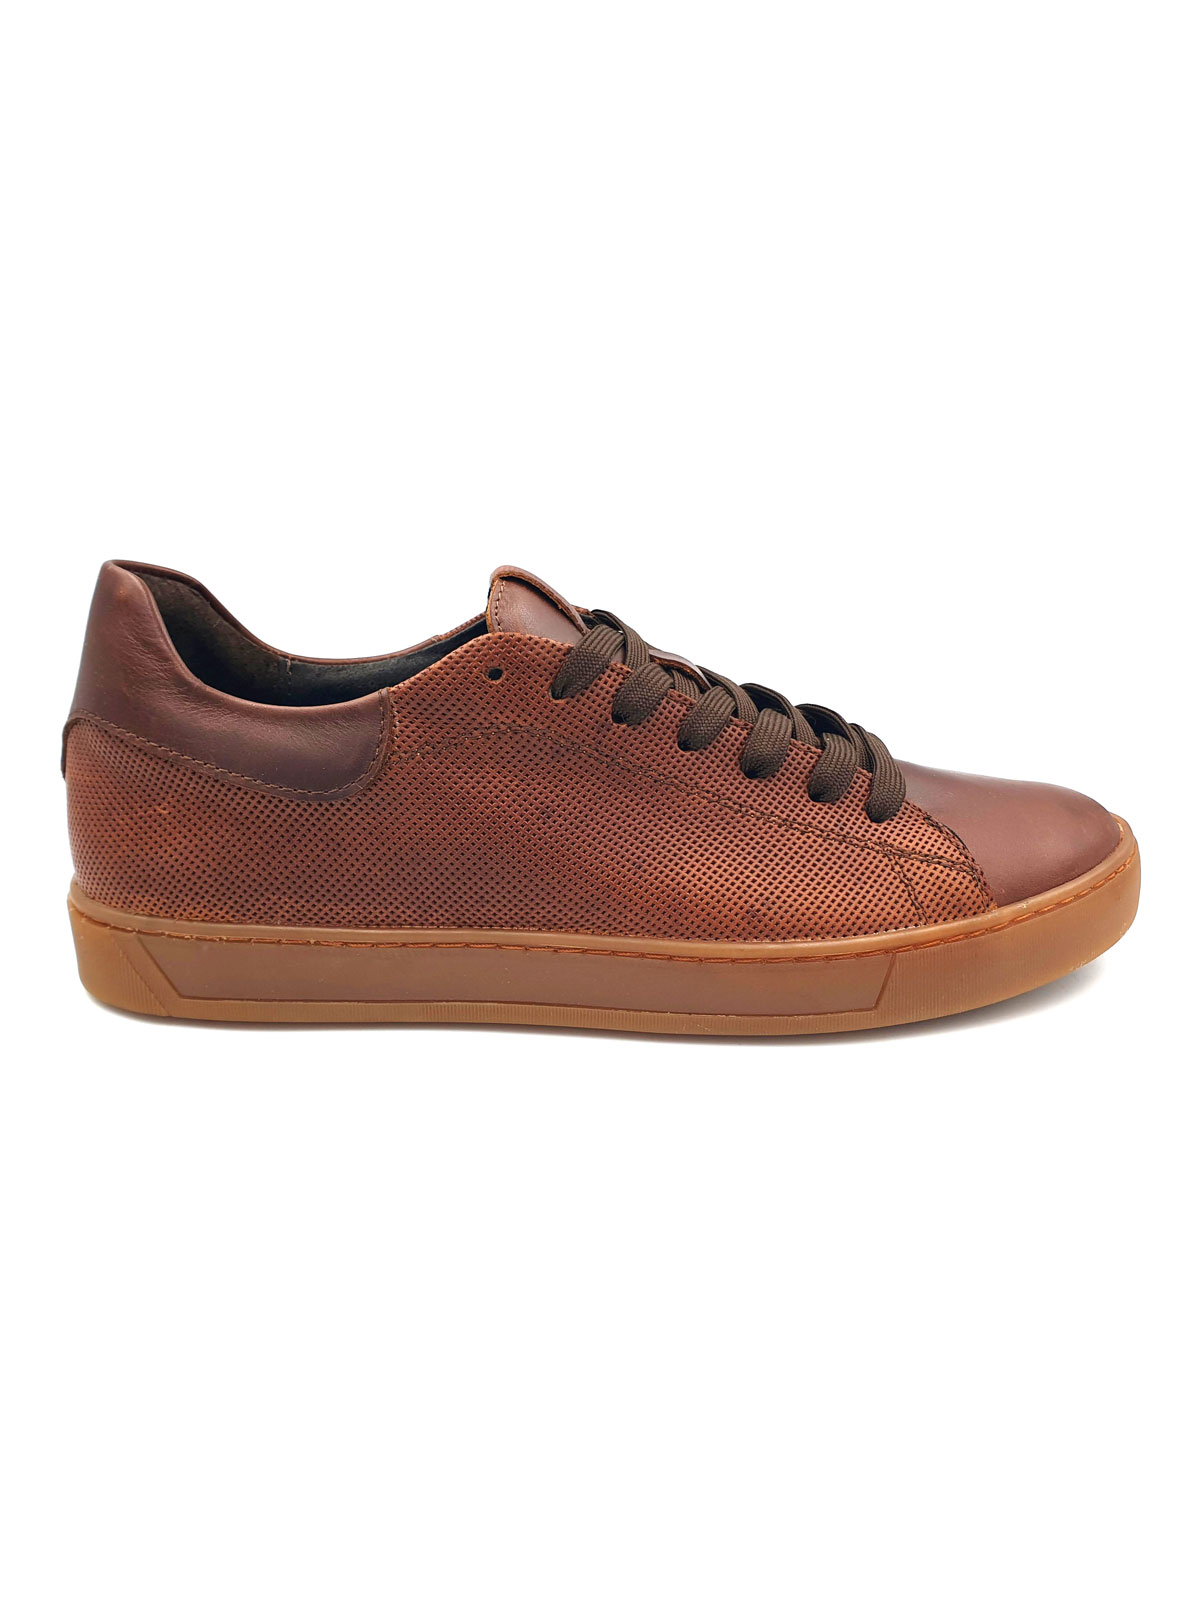 Mens leather shoes in brown - 81109 - € 83.80 img2